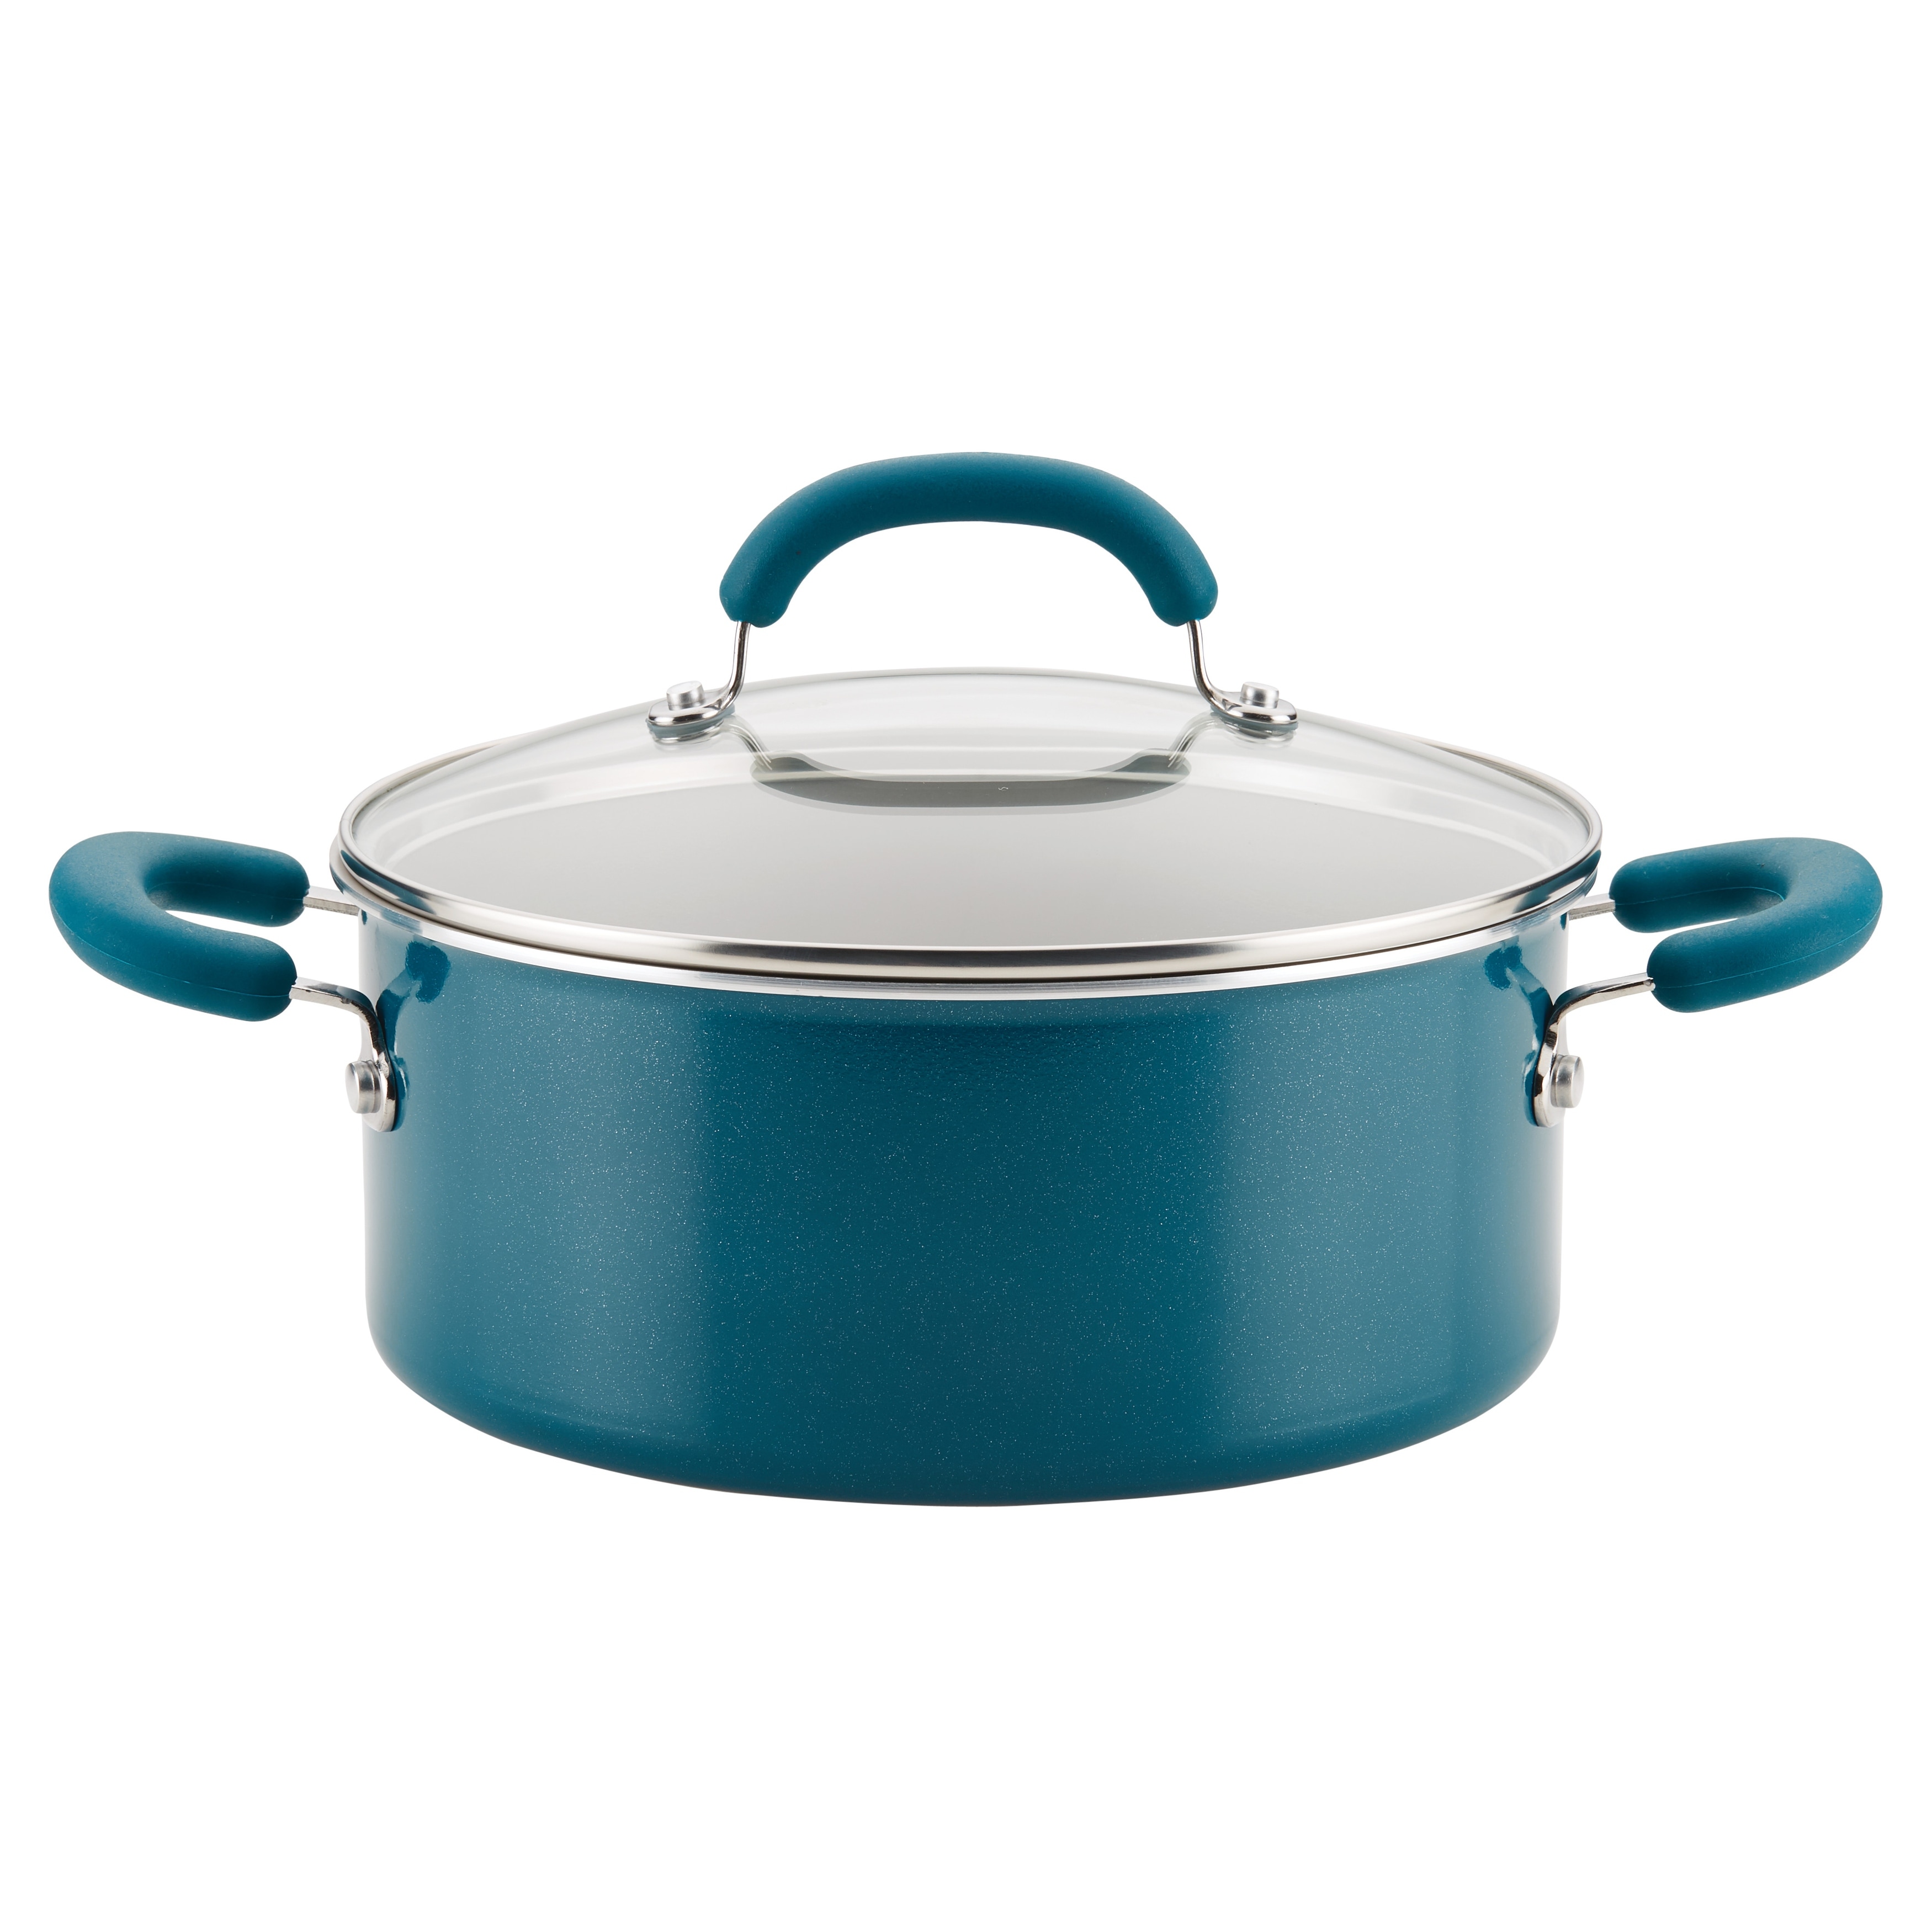 https://ak1.ostkcdn.com/images/products/is/images/direct/12aeb98772de326e89ab583b2b29d5bb184bc143/Rachael-Ray-Create-Delicious-Aluminum-Nonstick-Induction-Dutch-Oven-with-Lid%2C-5-Quart%2C-Teal-Shimmer.jpg